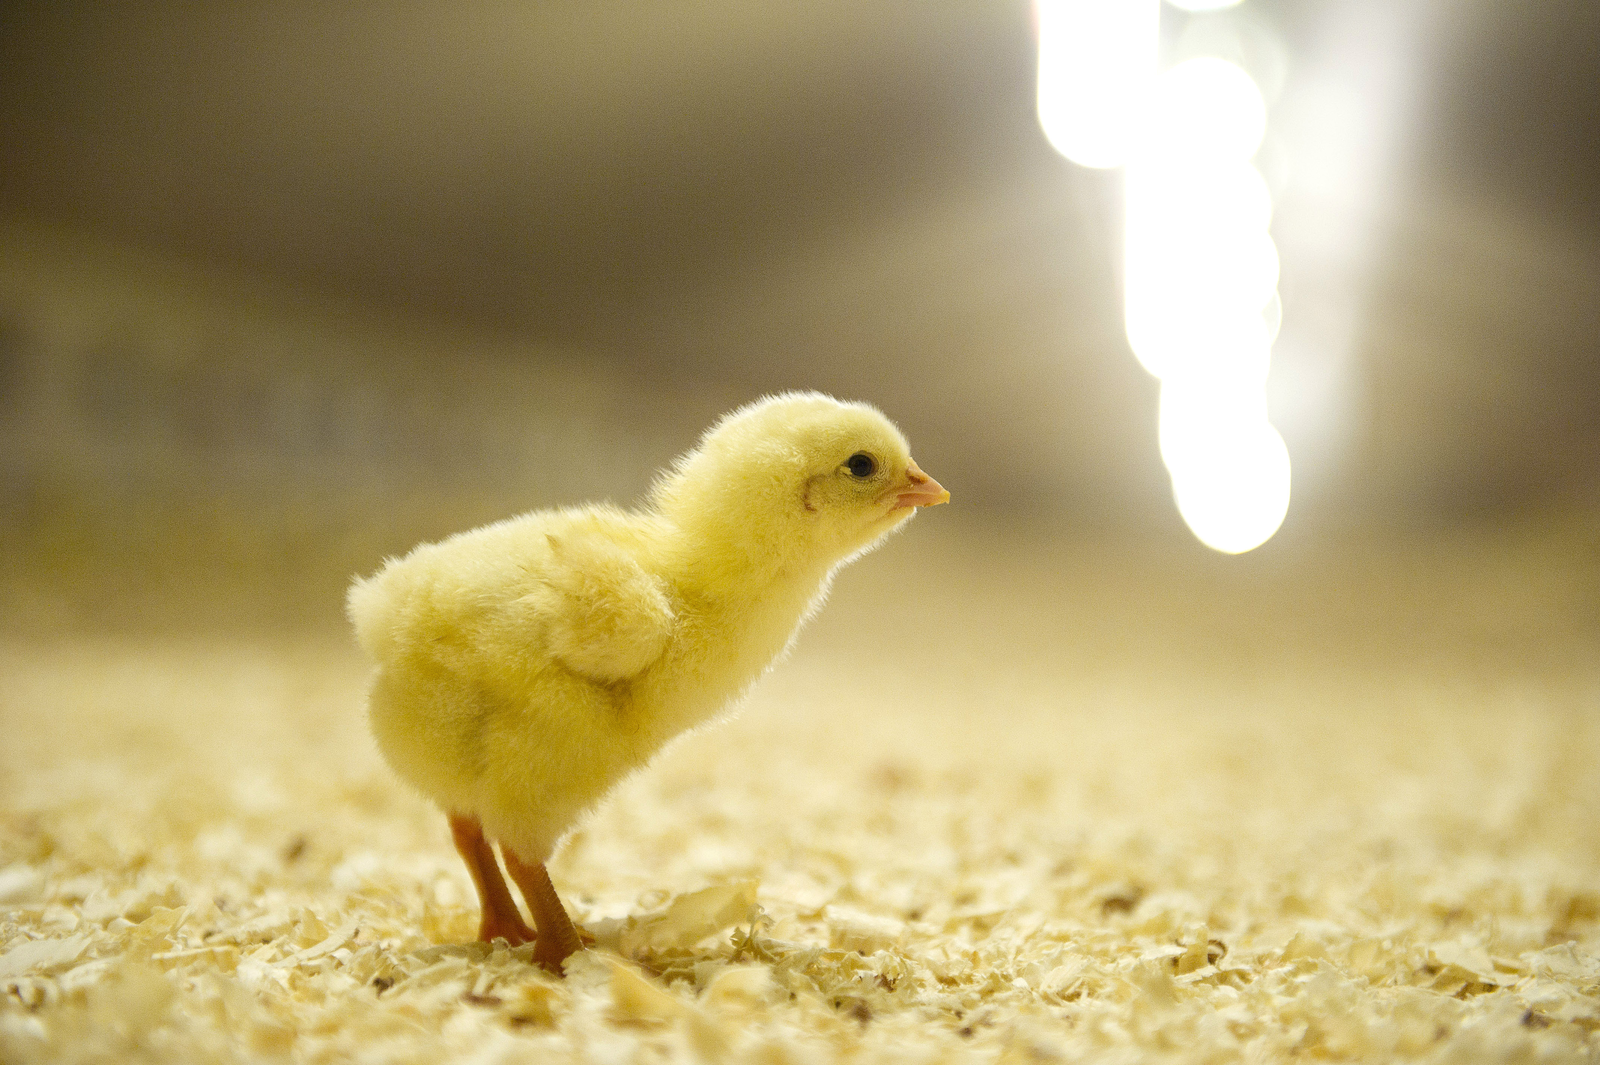 “Sustainable poultry production needed”